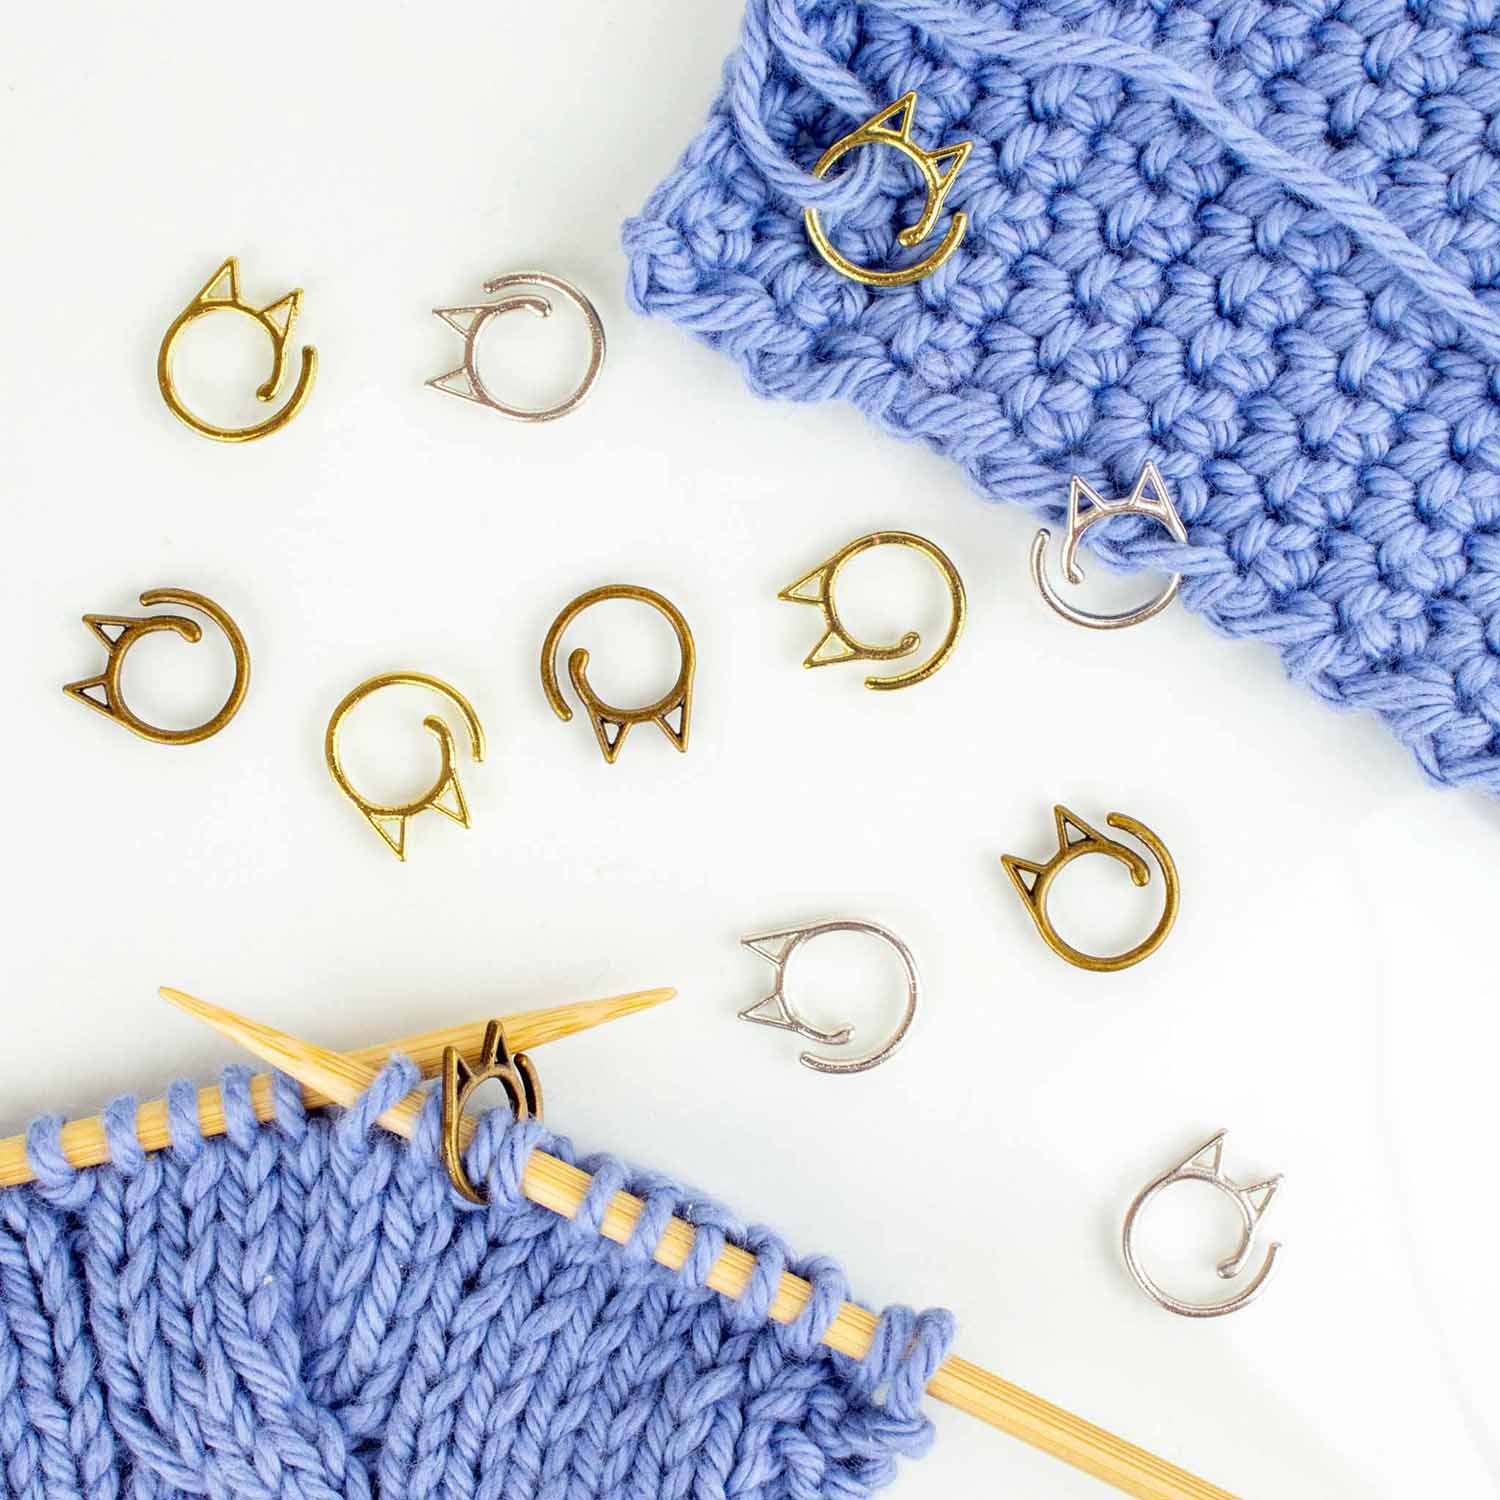 Stitch Markers: How to Place, Slip, and Use Markers in Knitting